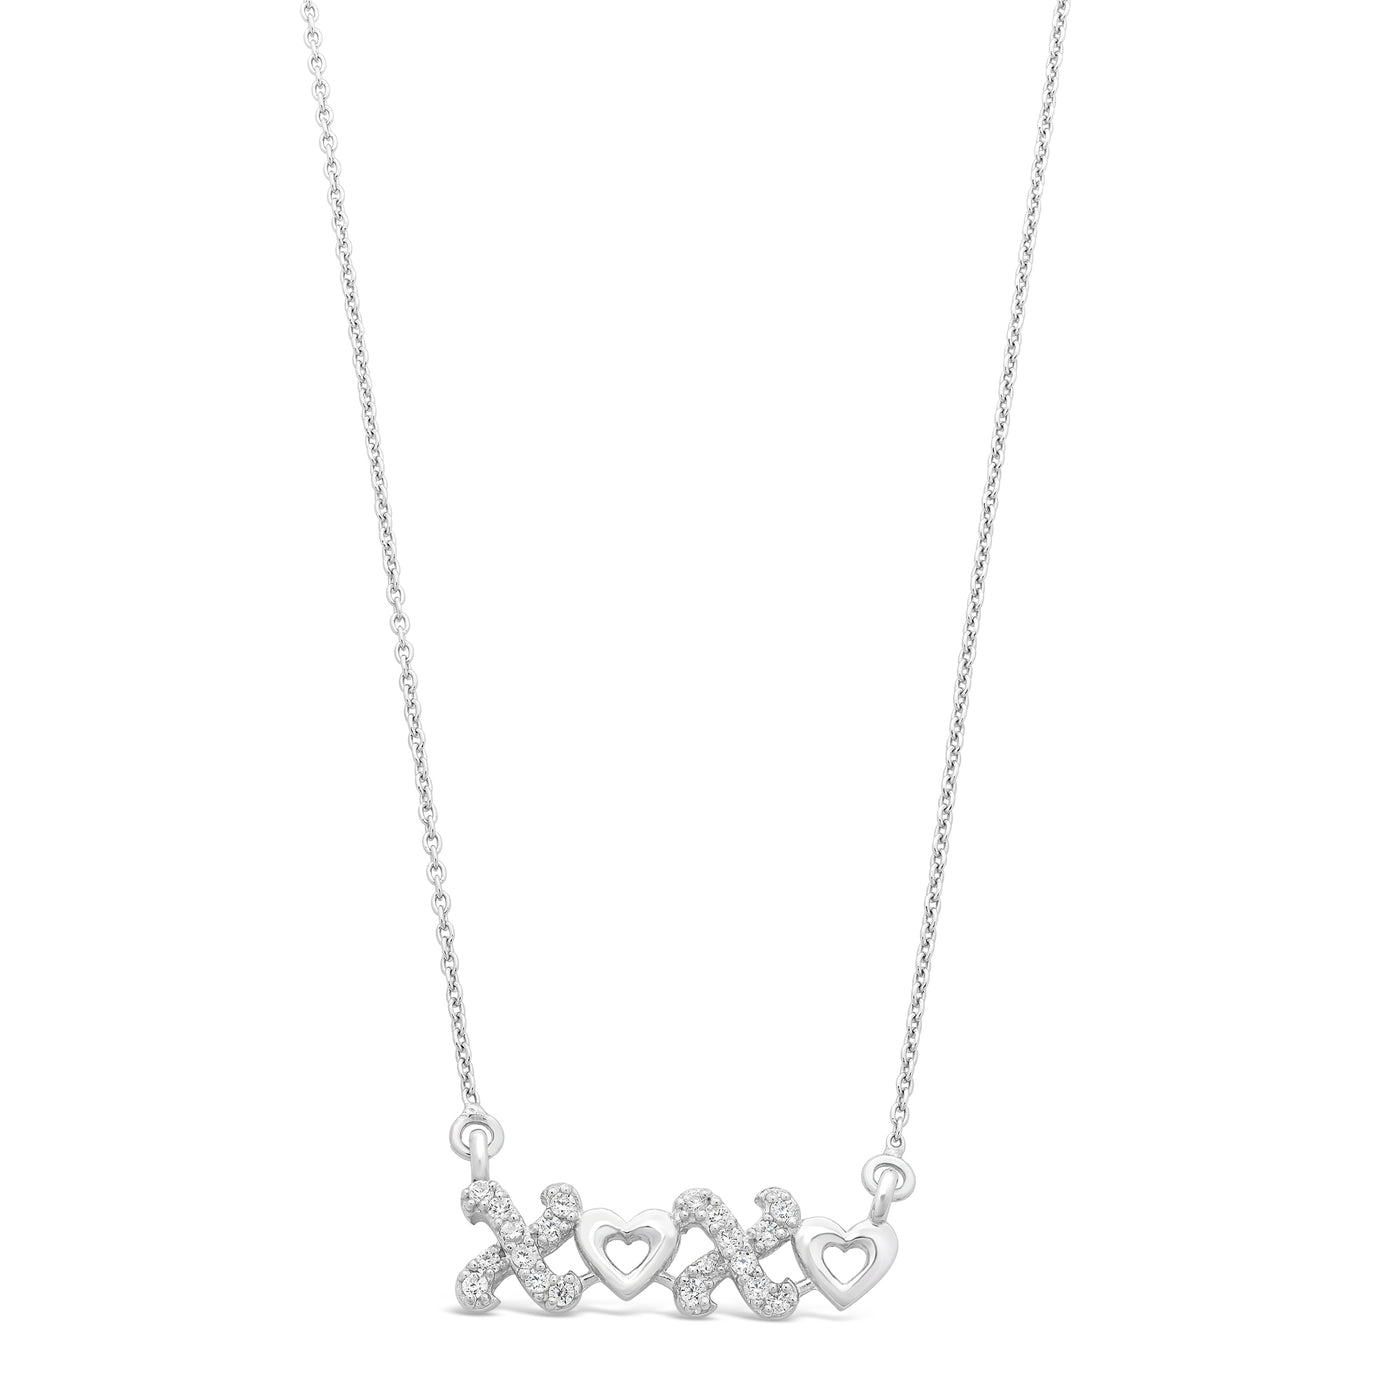 Sterling Silver "X O X O' Necklace.